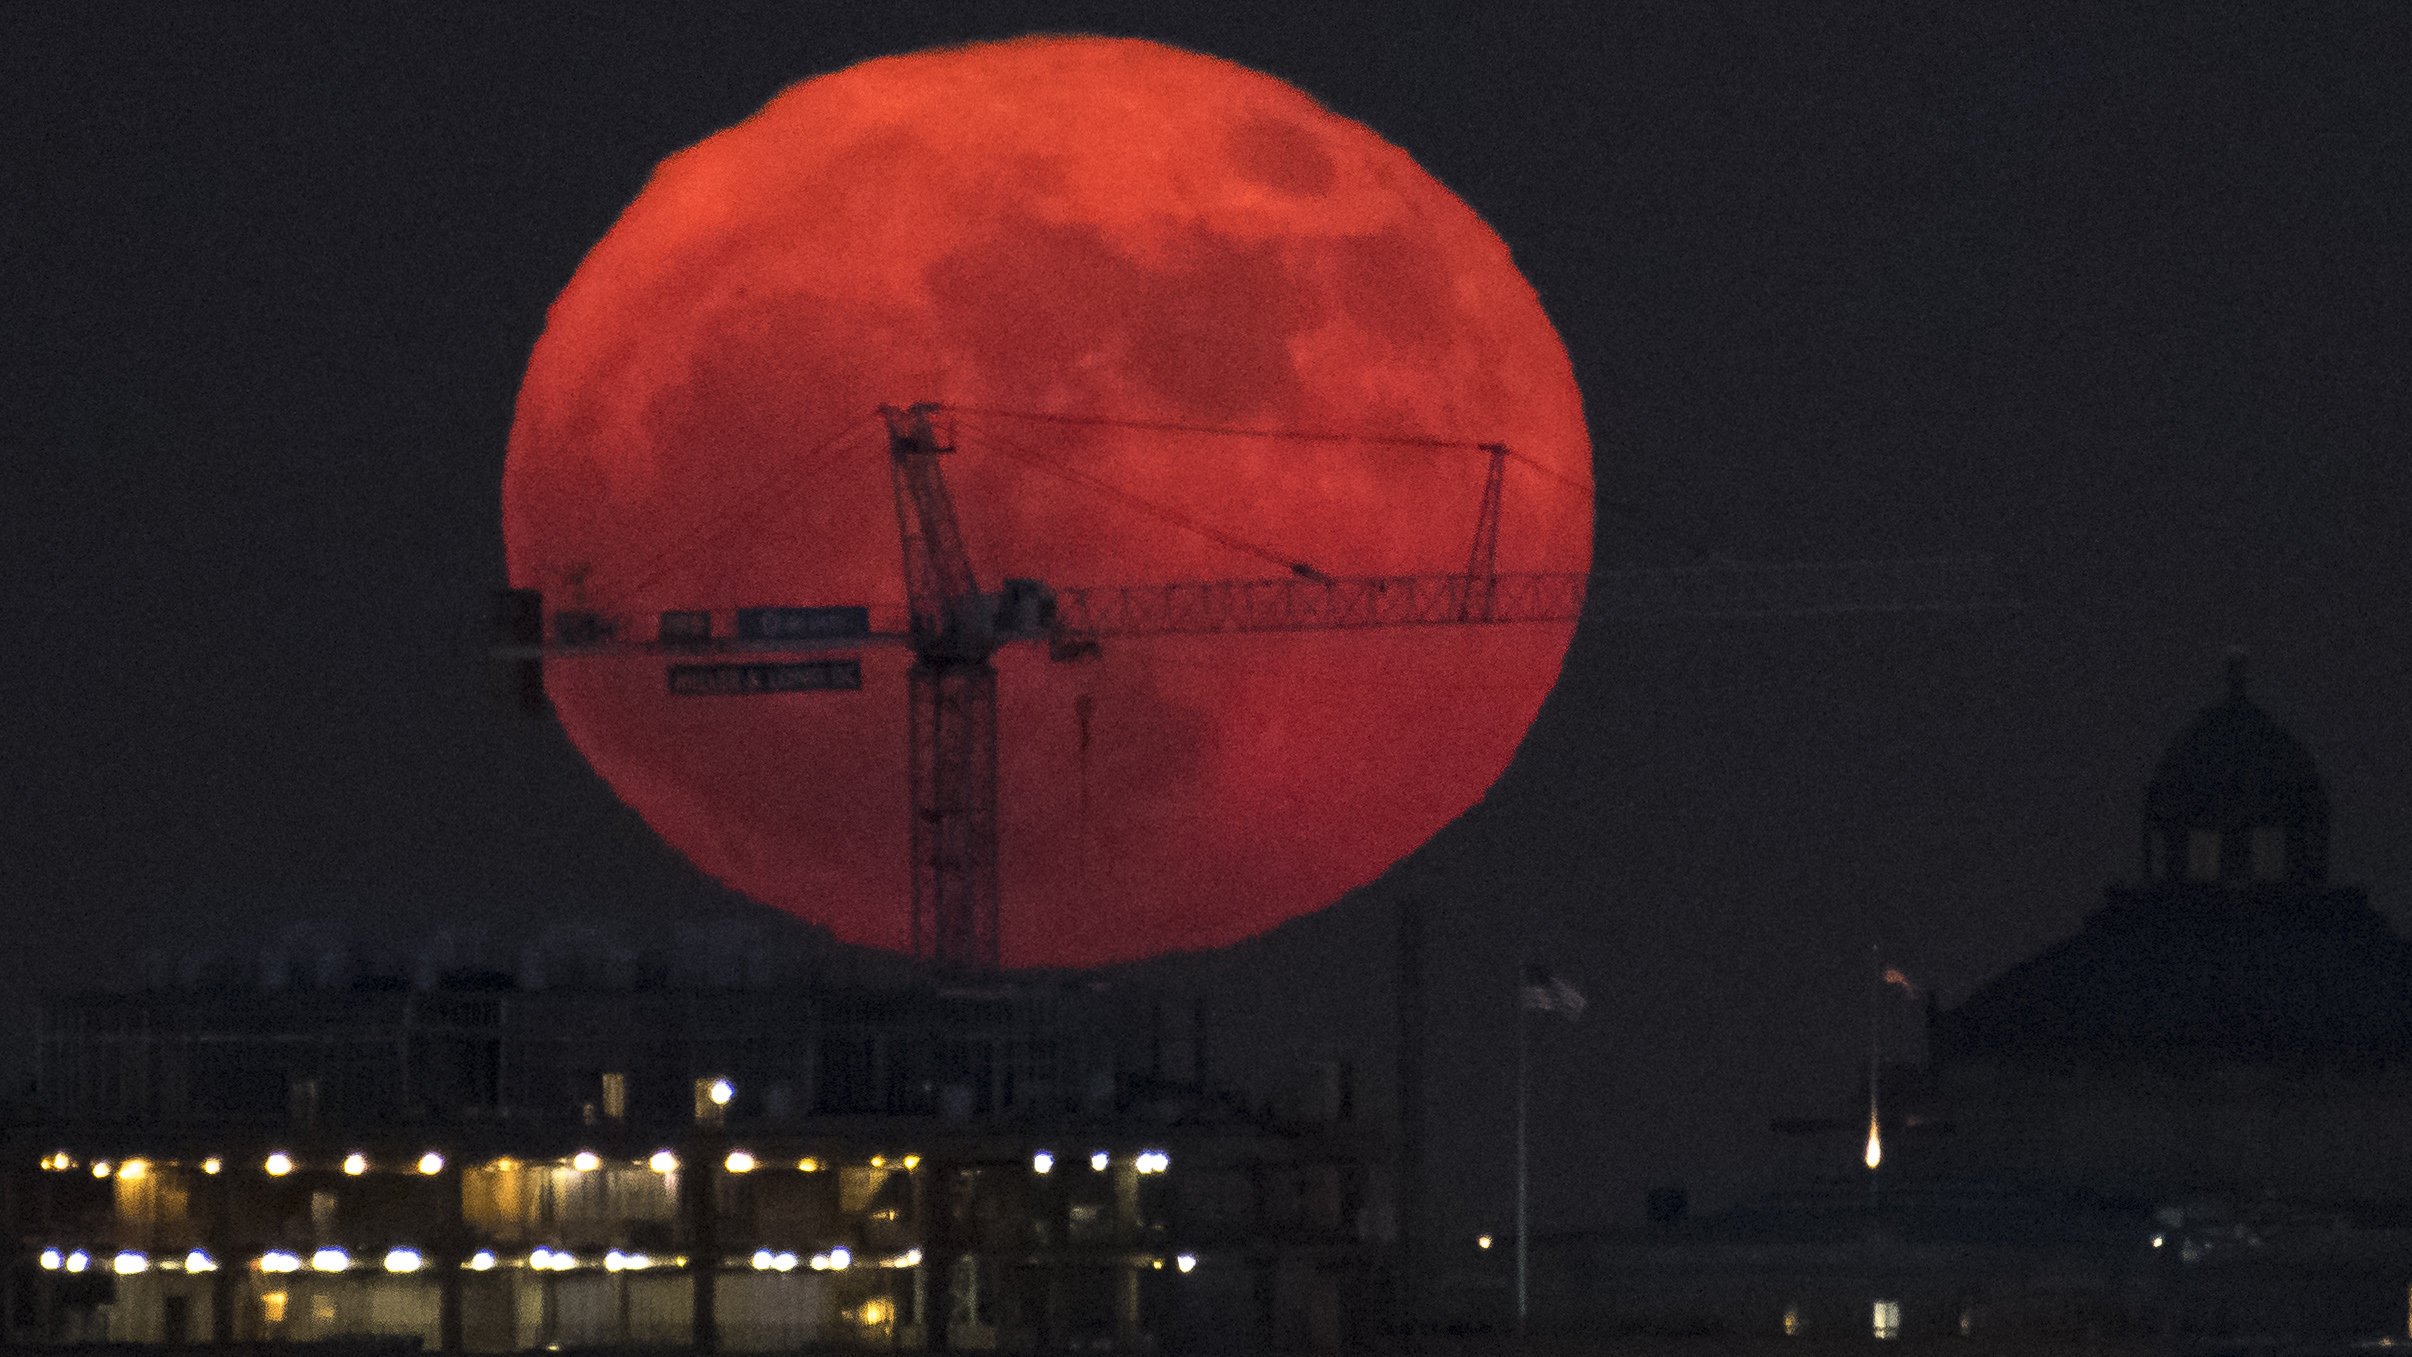 Strawberry supermoon June full moon free webcast canceled due to